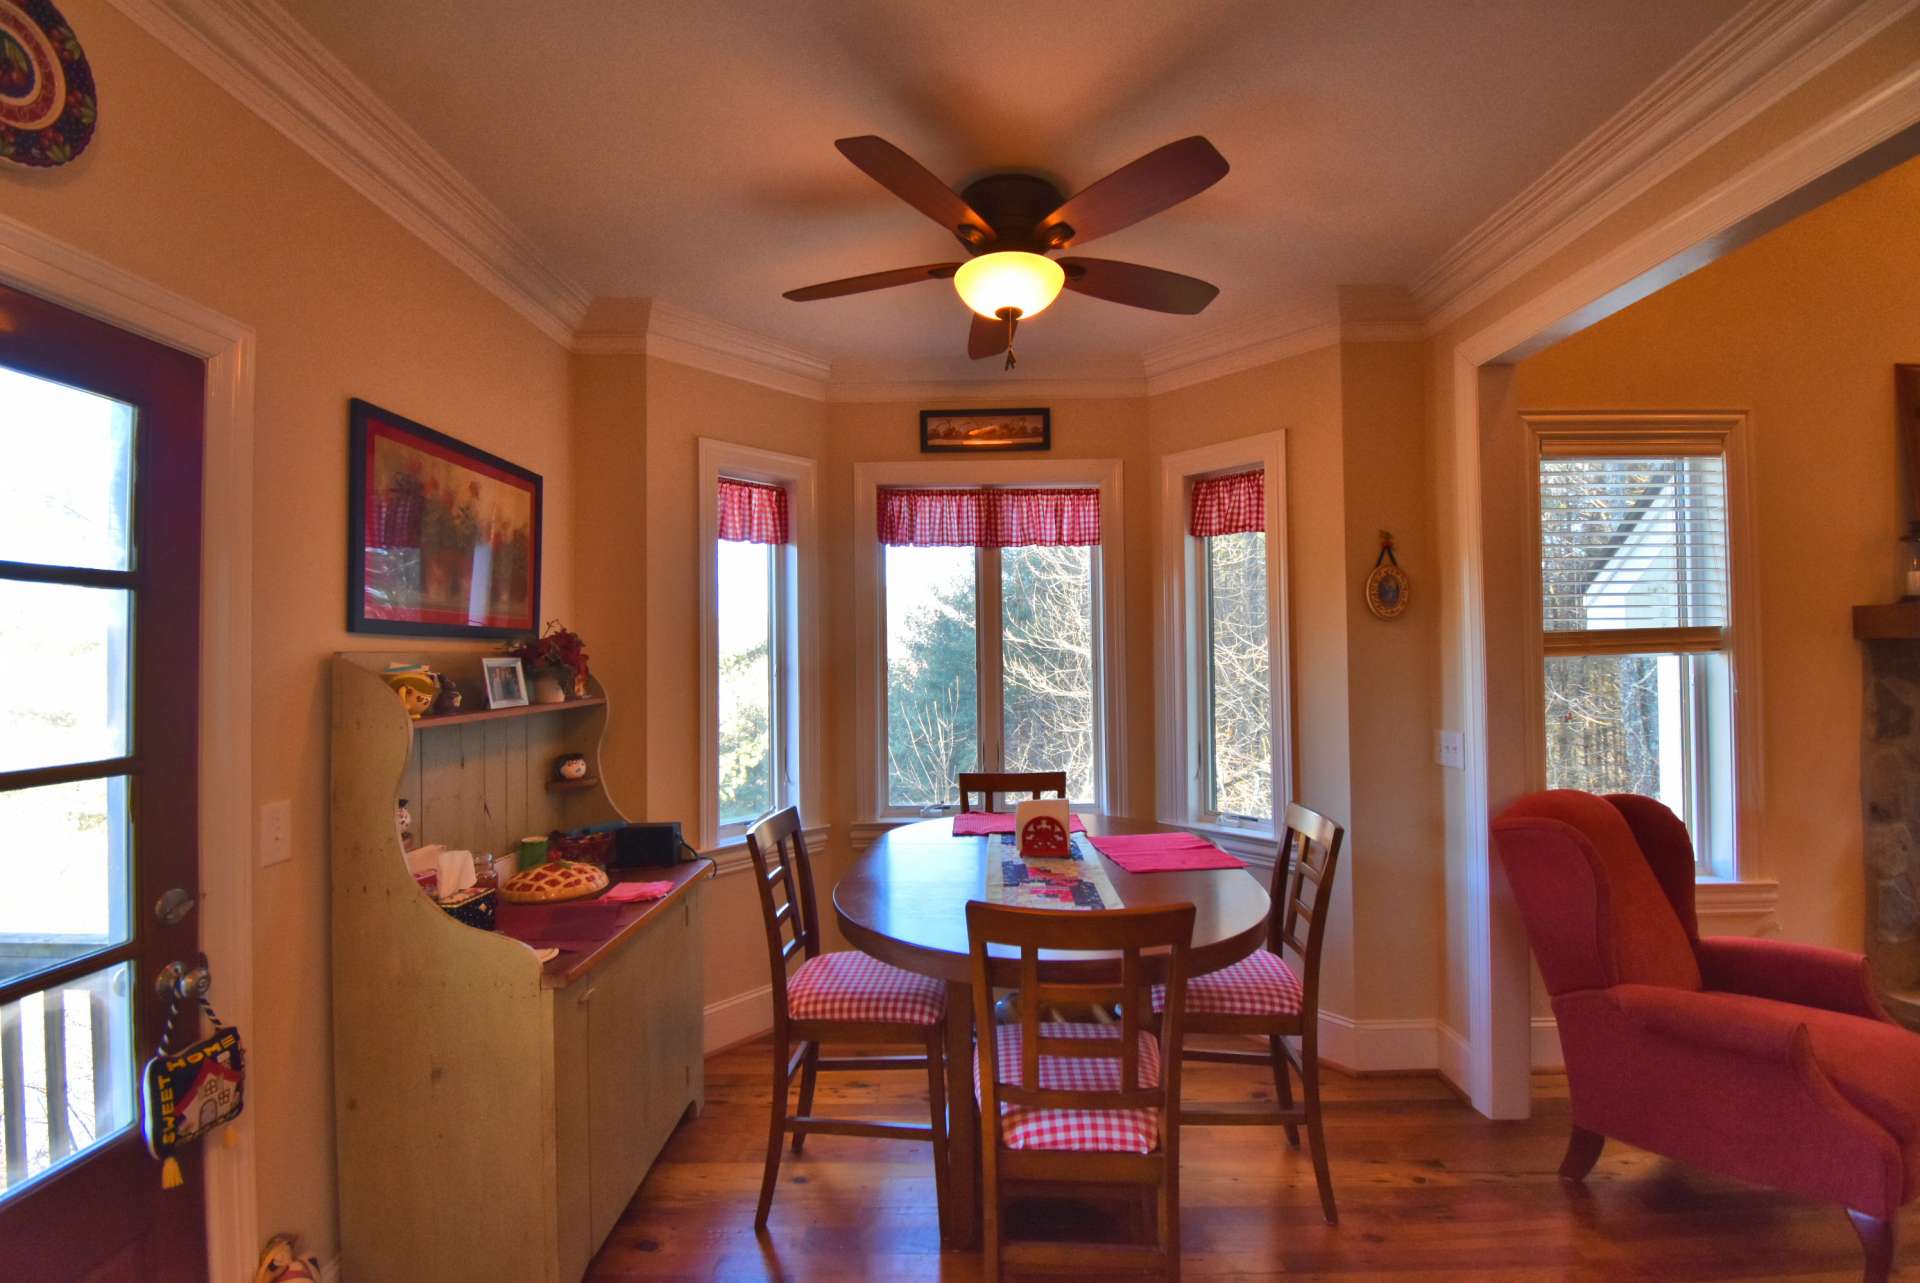 Other features include crown molding and a large bay window in the dining area enabling enjoyment of the outdoors while dining.